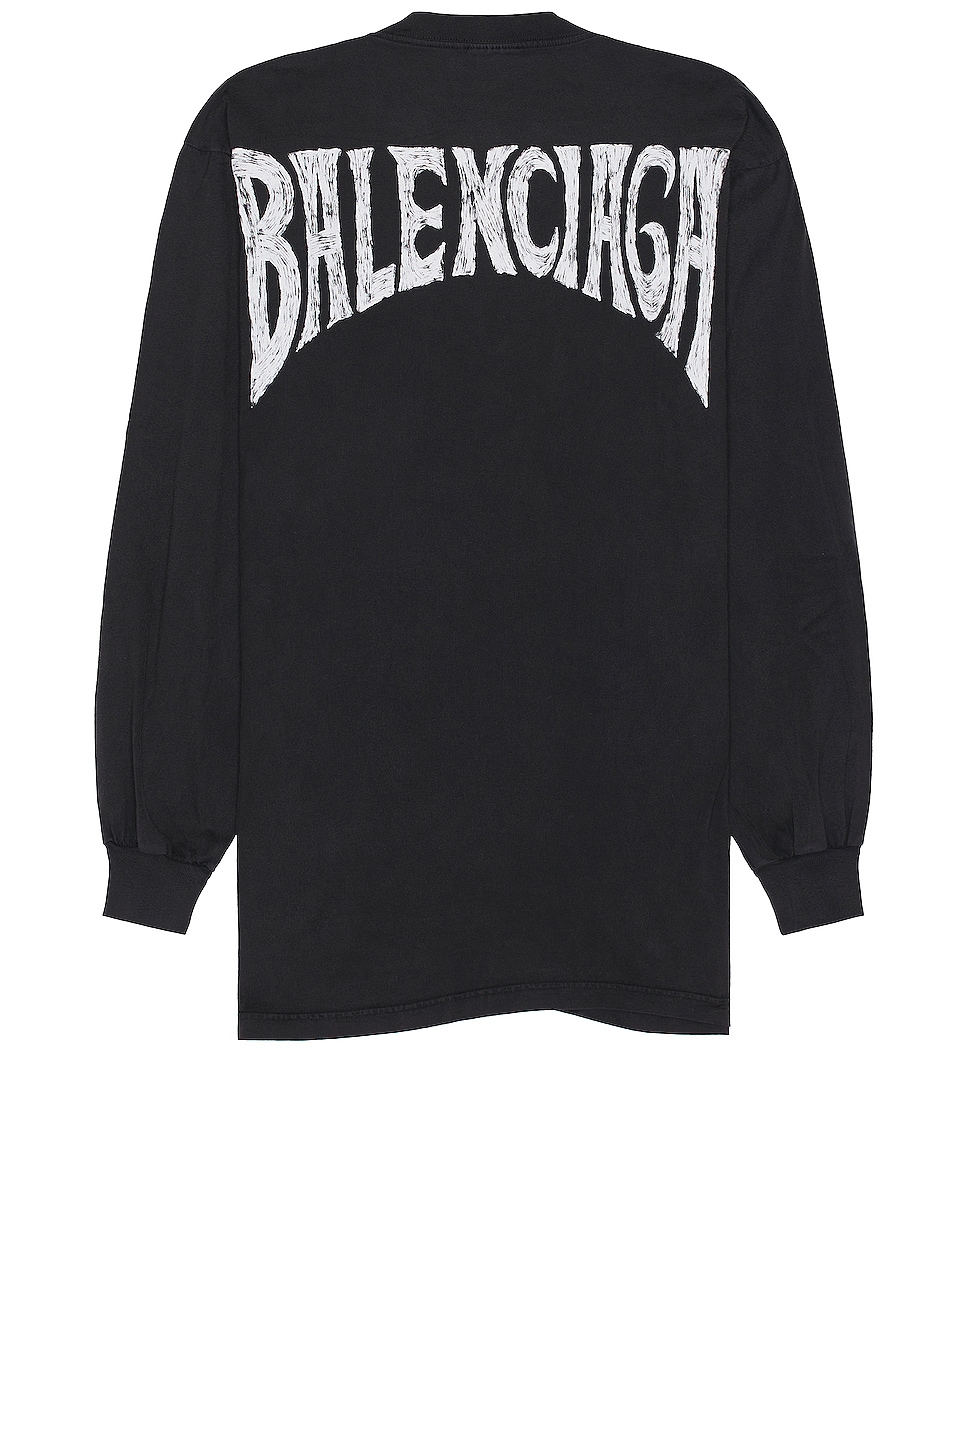 Image 1 of Balenciaga Stretched T-shirt in Faded Black & White